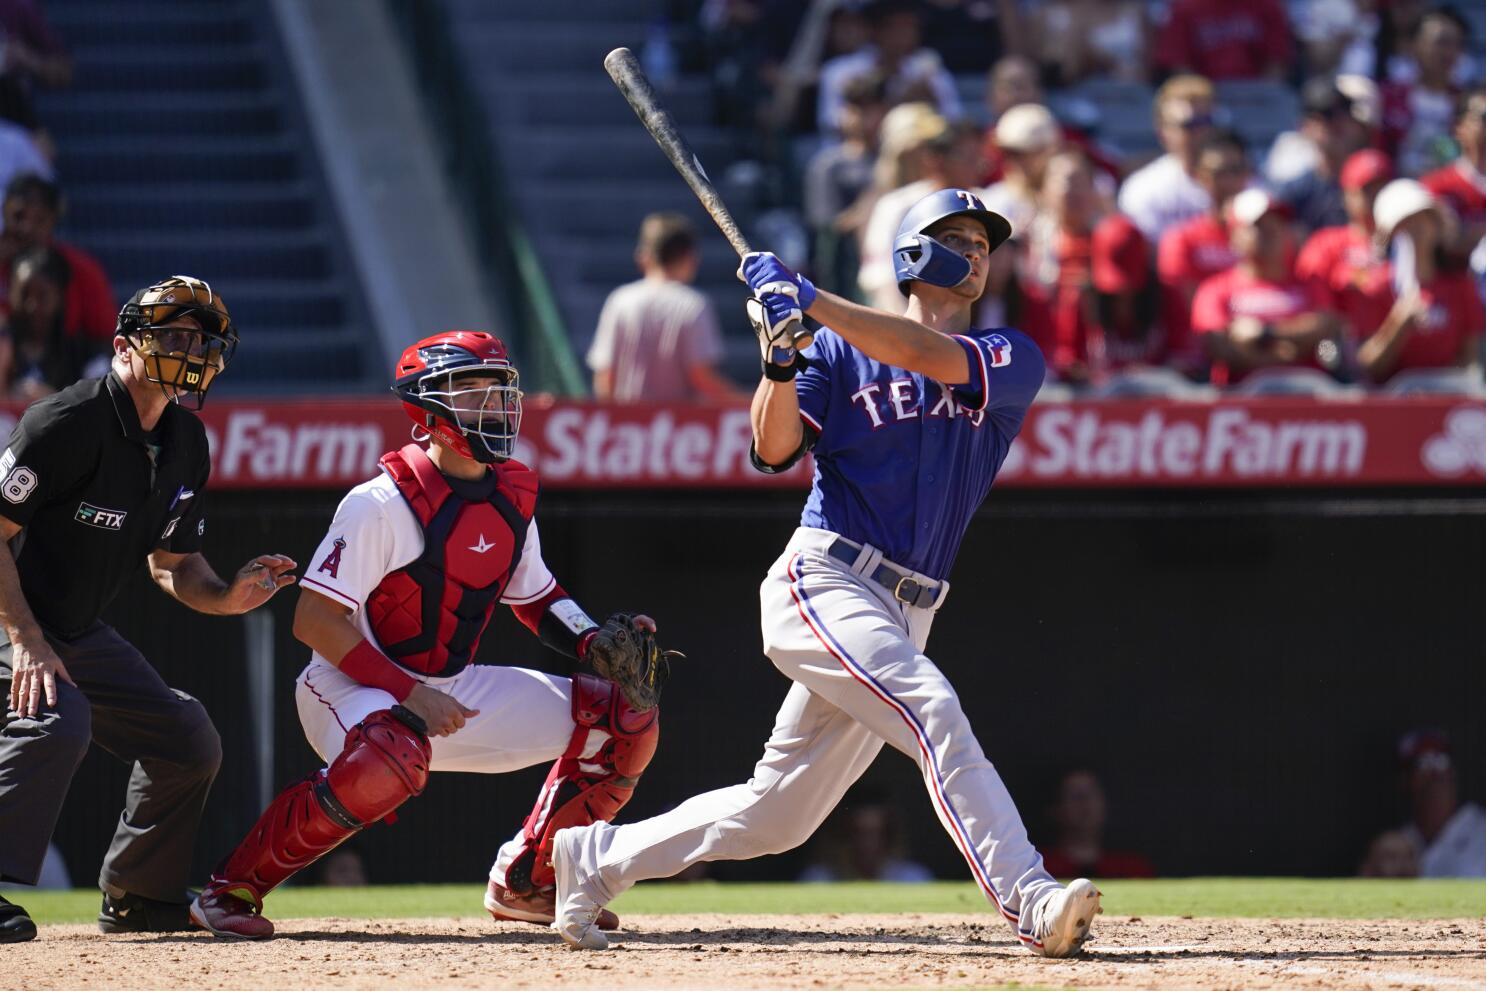 Marcus Semien's batting glove costs Rangers an out in bizarre